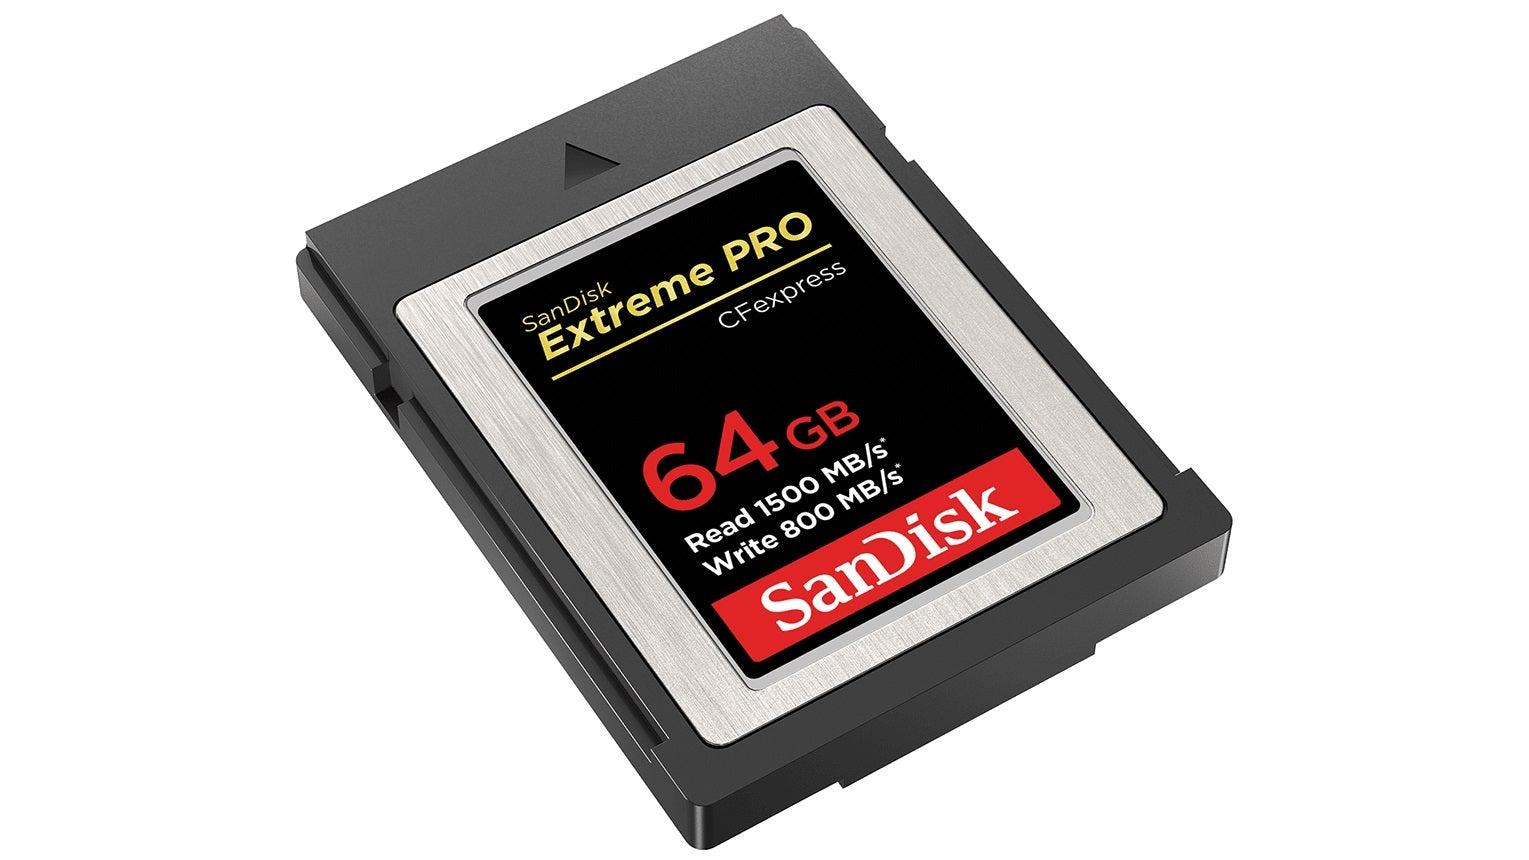 SanDisk Extreme PRO 64GB CF Express Card Type B, up to 1500MB/s, for RAW 4K video